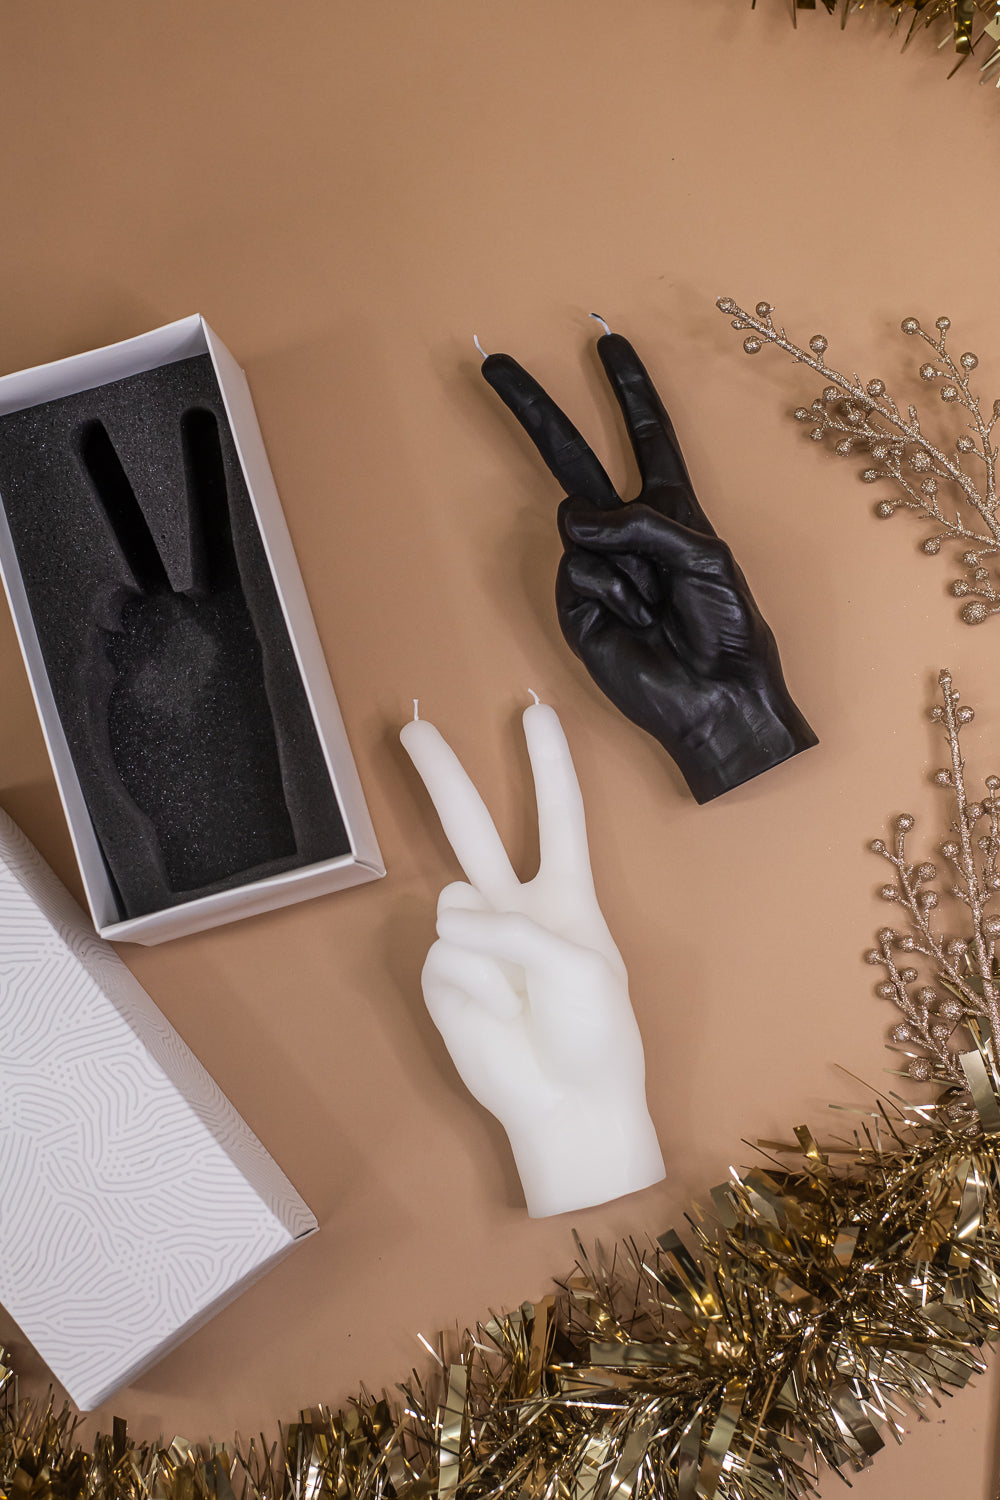 Hand Gesture Candle, Peace Black